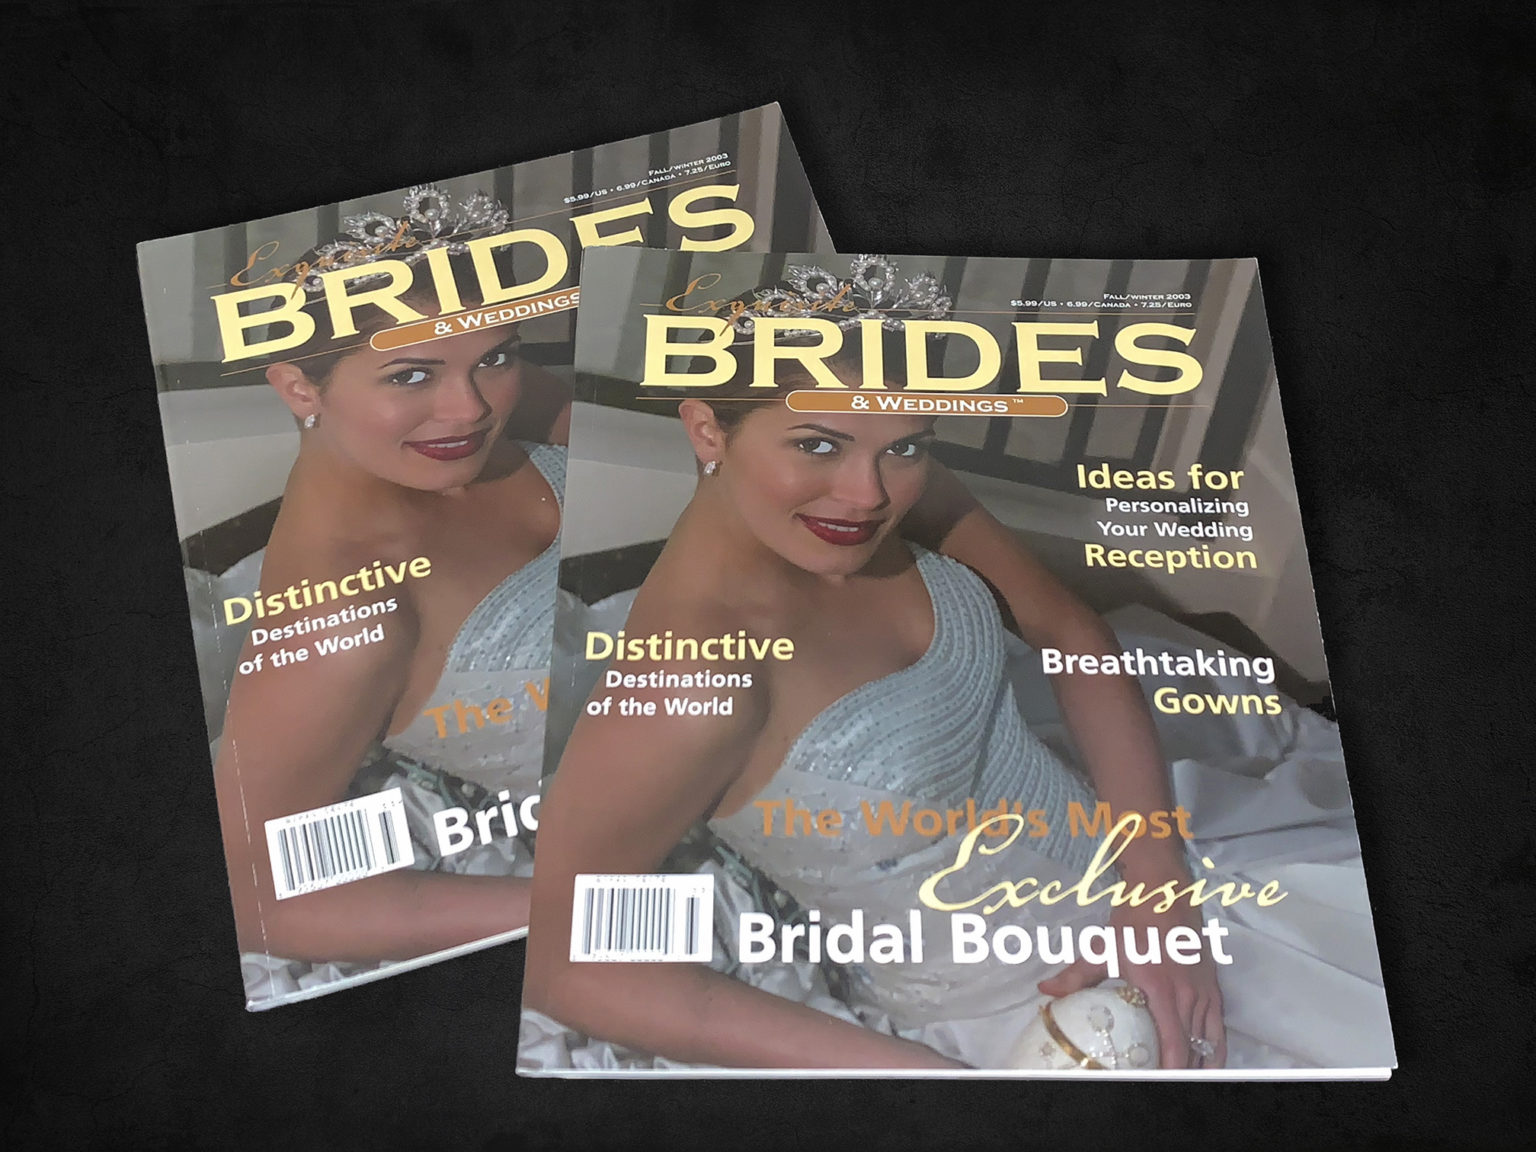 Exquisite Brides & Weddings Magazine Covers • Designed by: Designs In Motion, Inc.